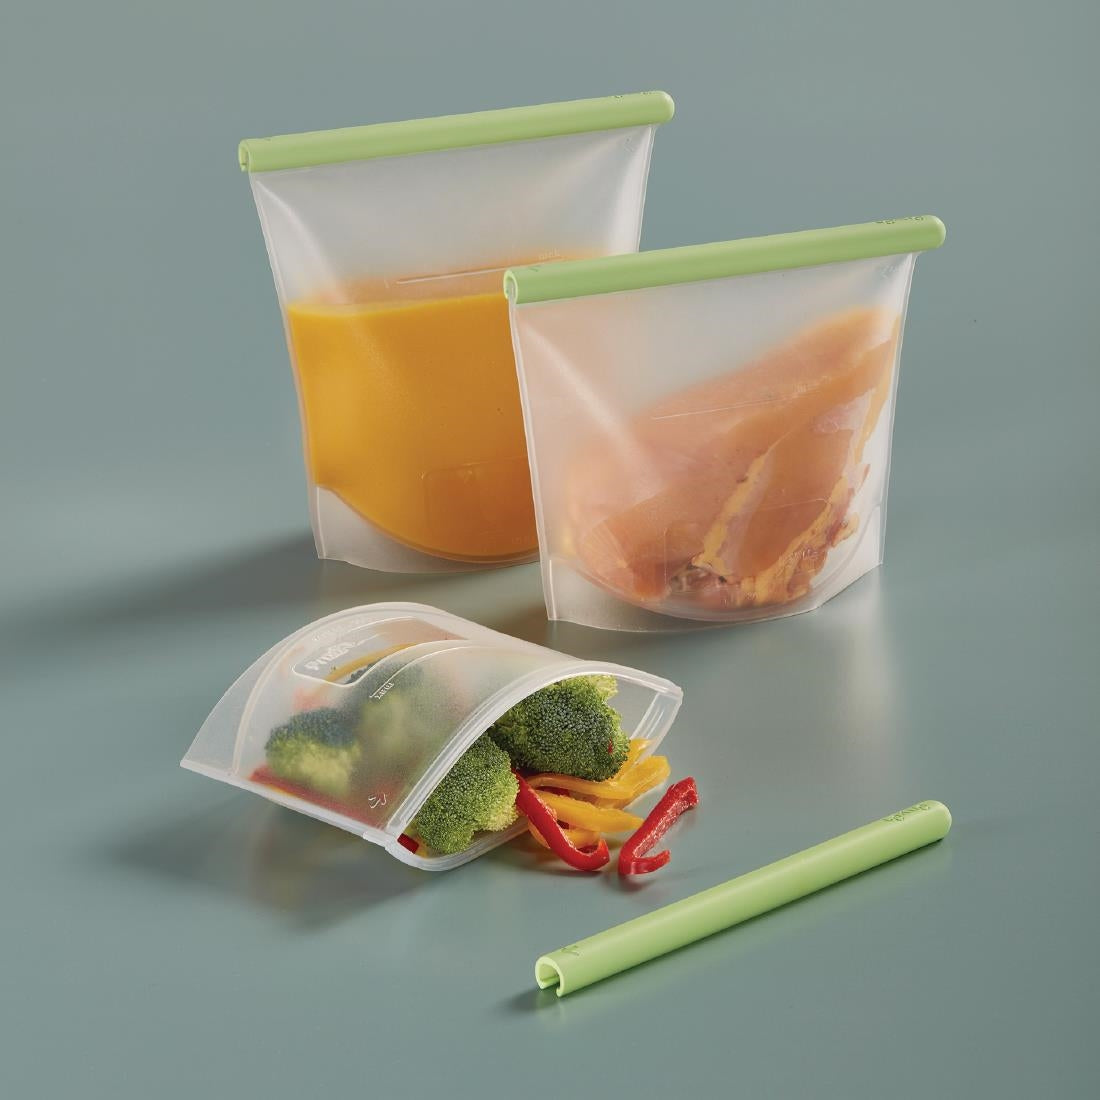 FS290 Lekue Reusable Silicone Food Storage Bag 1.5Ltr JD Catering Equipment Solutions Ltd